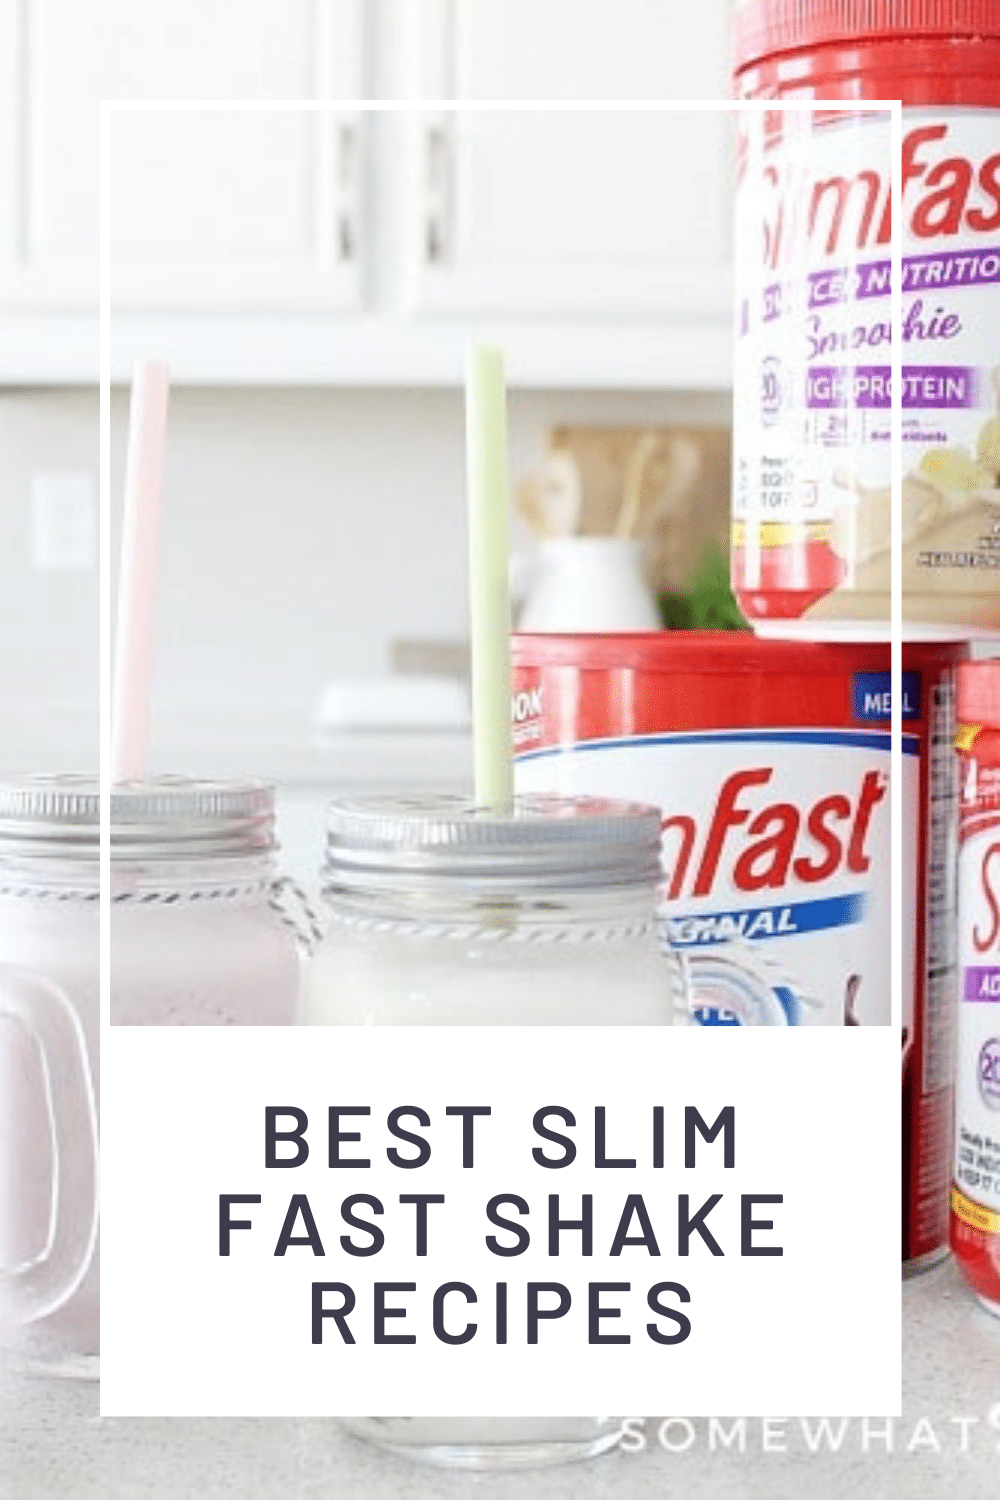 Slim Fast Shakes and smoothies are the best way to start your morning. This delicious recipe will make this healthy and convenient breakfast even better! These are ready in just minutes, so your morning routine is about to get a whole lot better! via @somewhatsimple